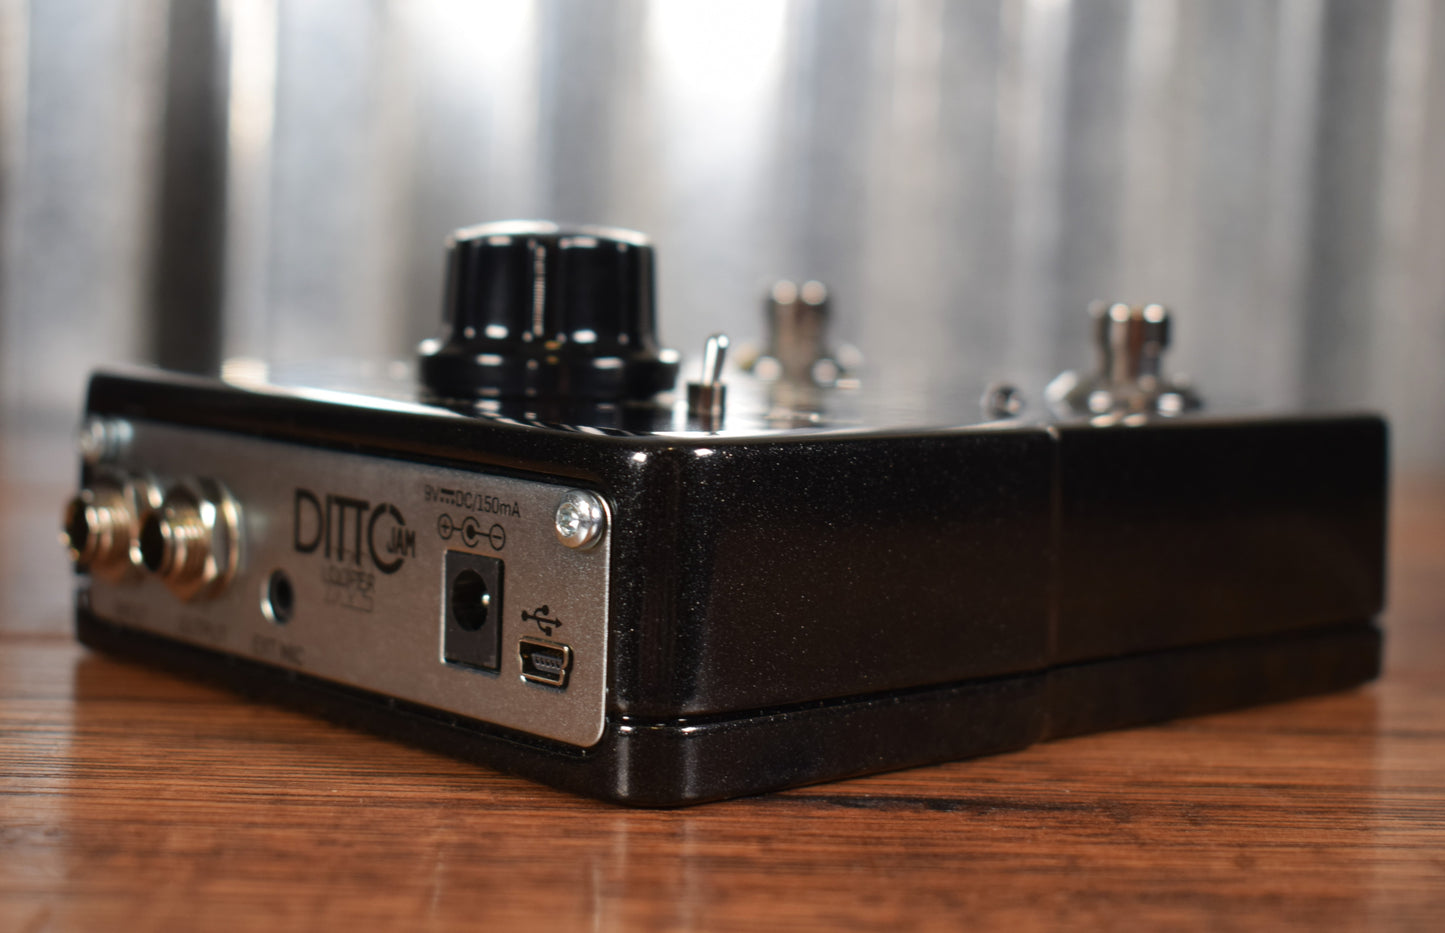 TC Electronic Ditto X2 Looper Guitar Effect Pedal Used